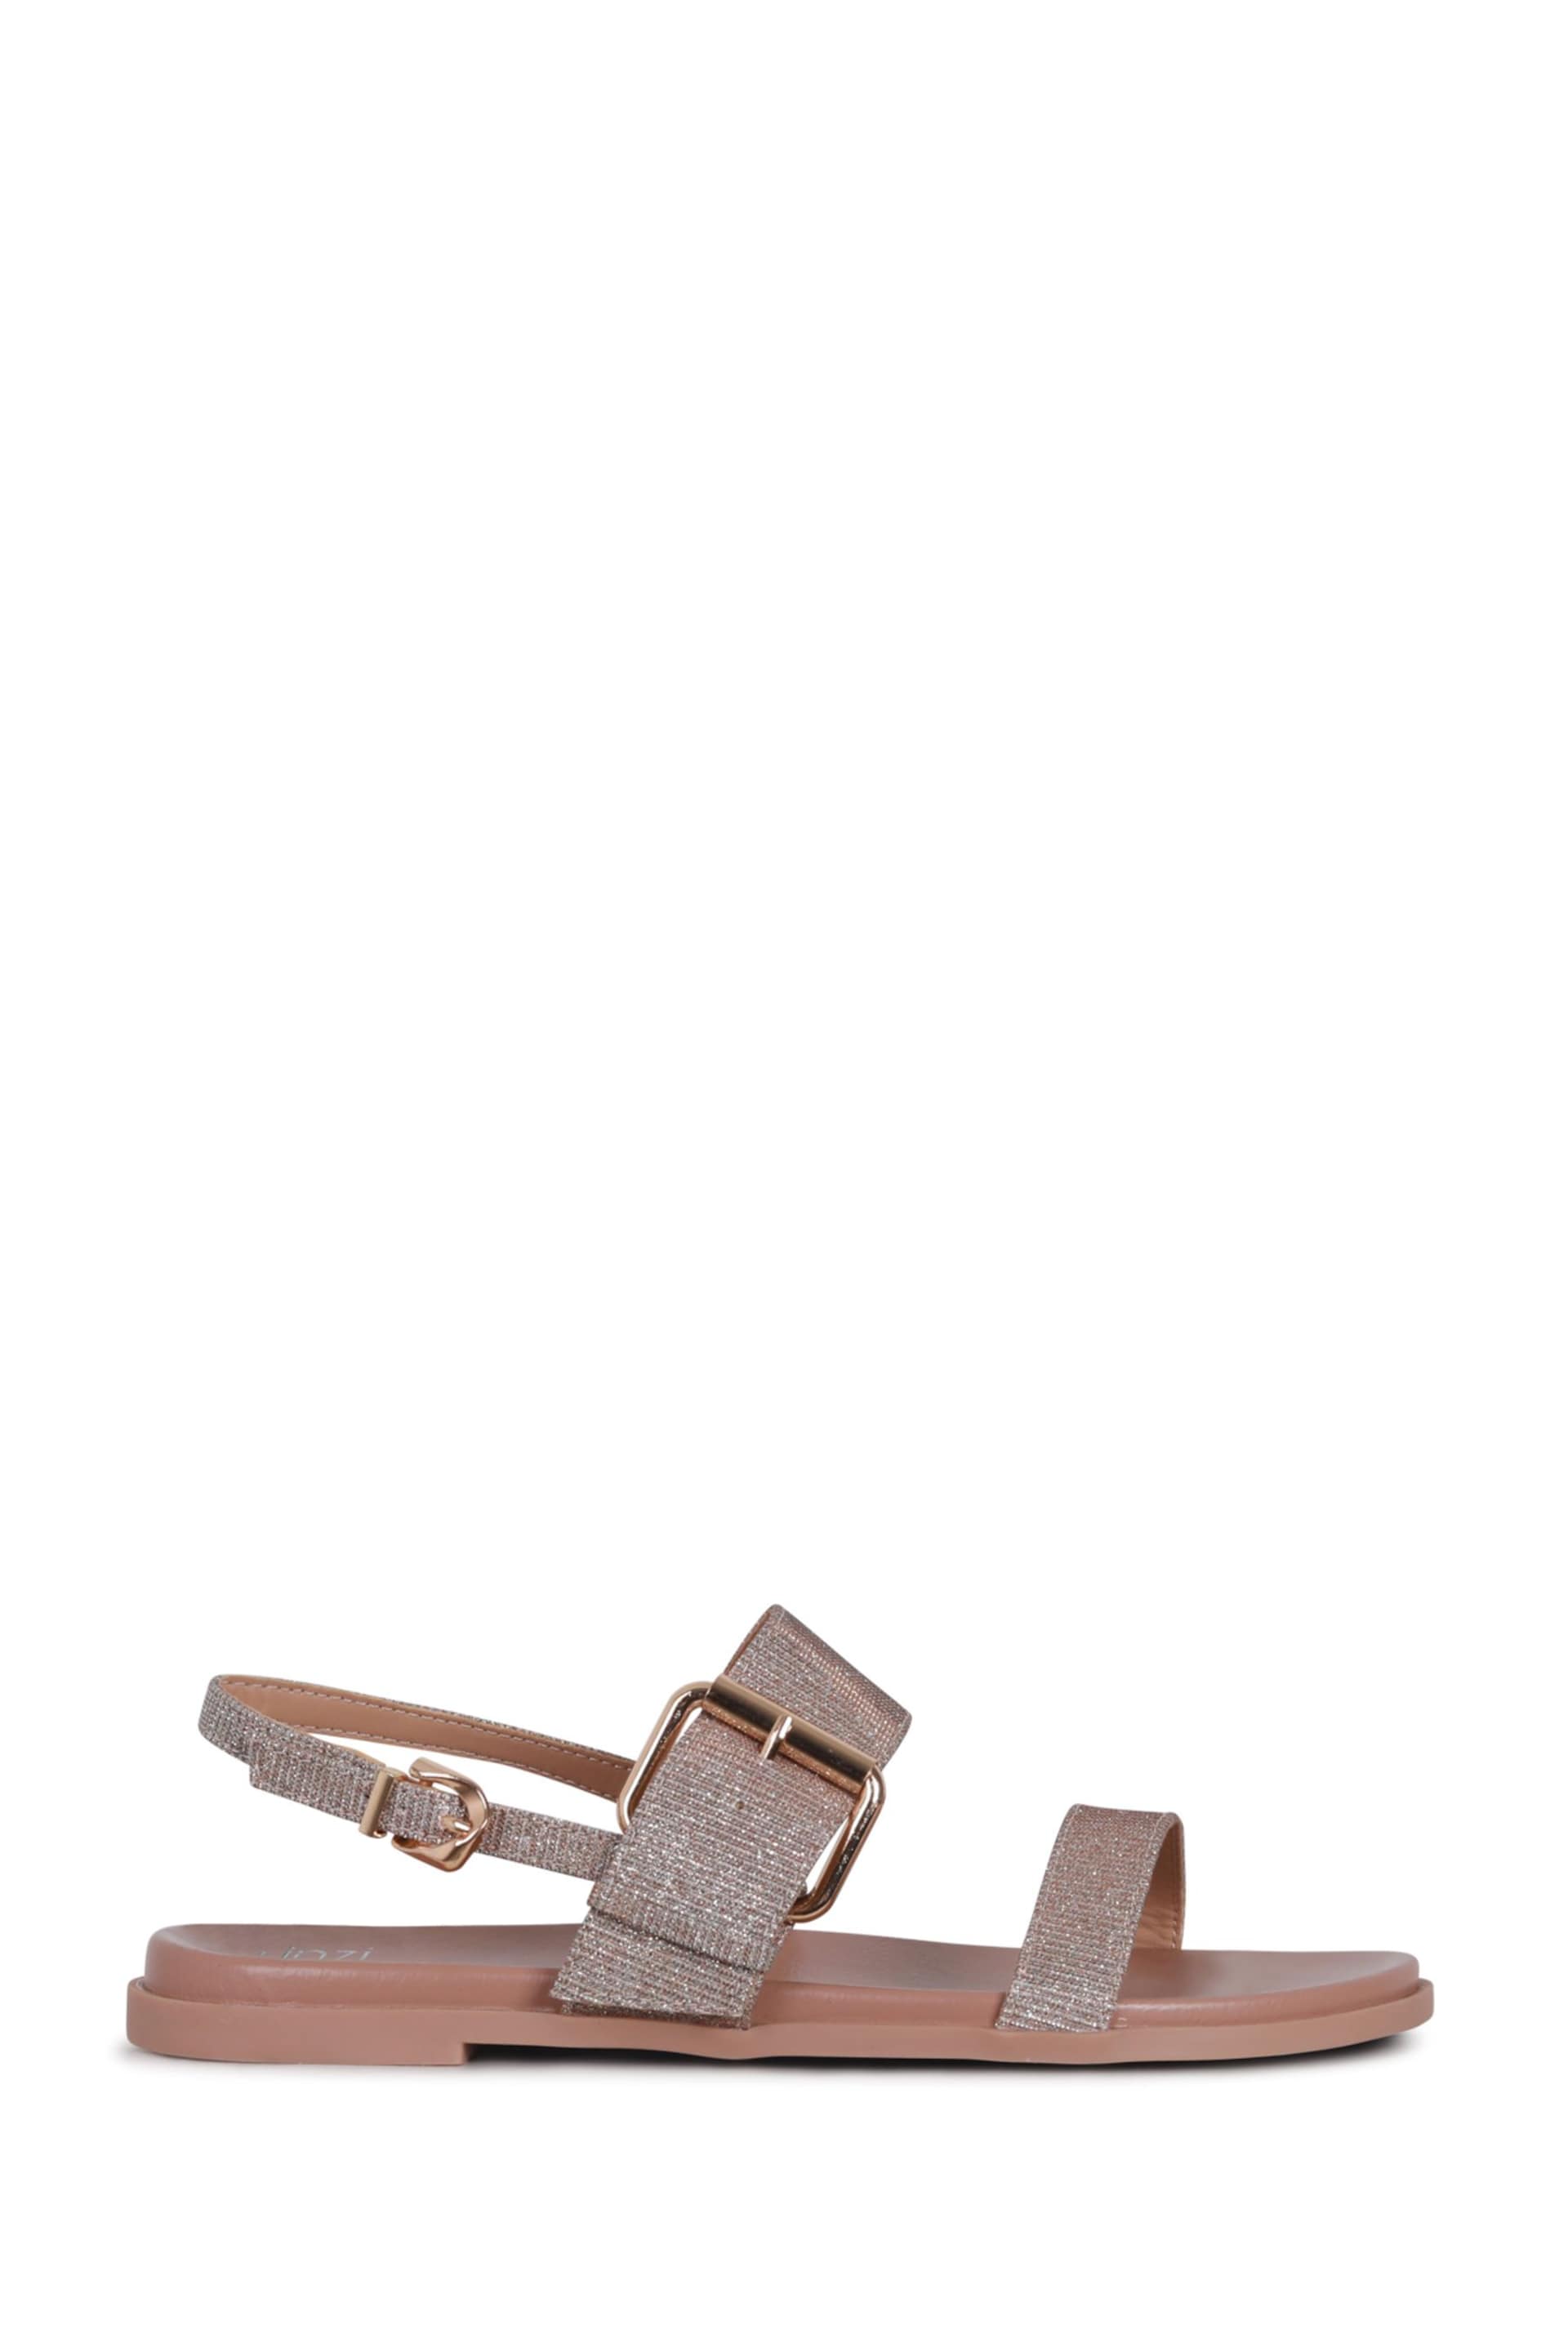 Linzi Gold Lucille Glitter Two Part Sandals With Large Buckle Detail - Image 2 of 4